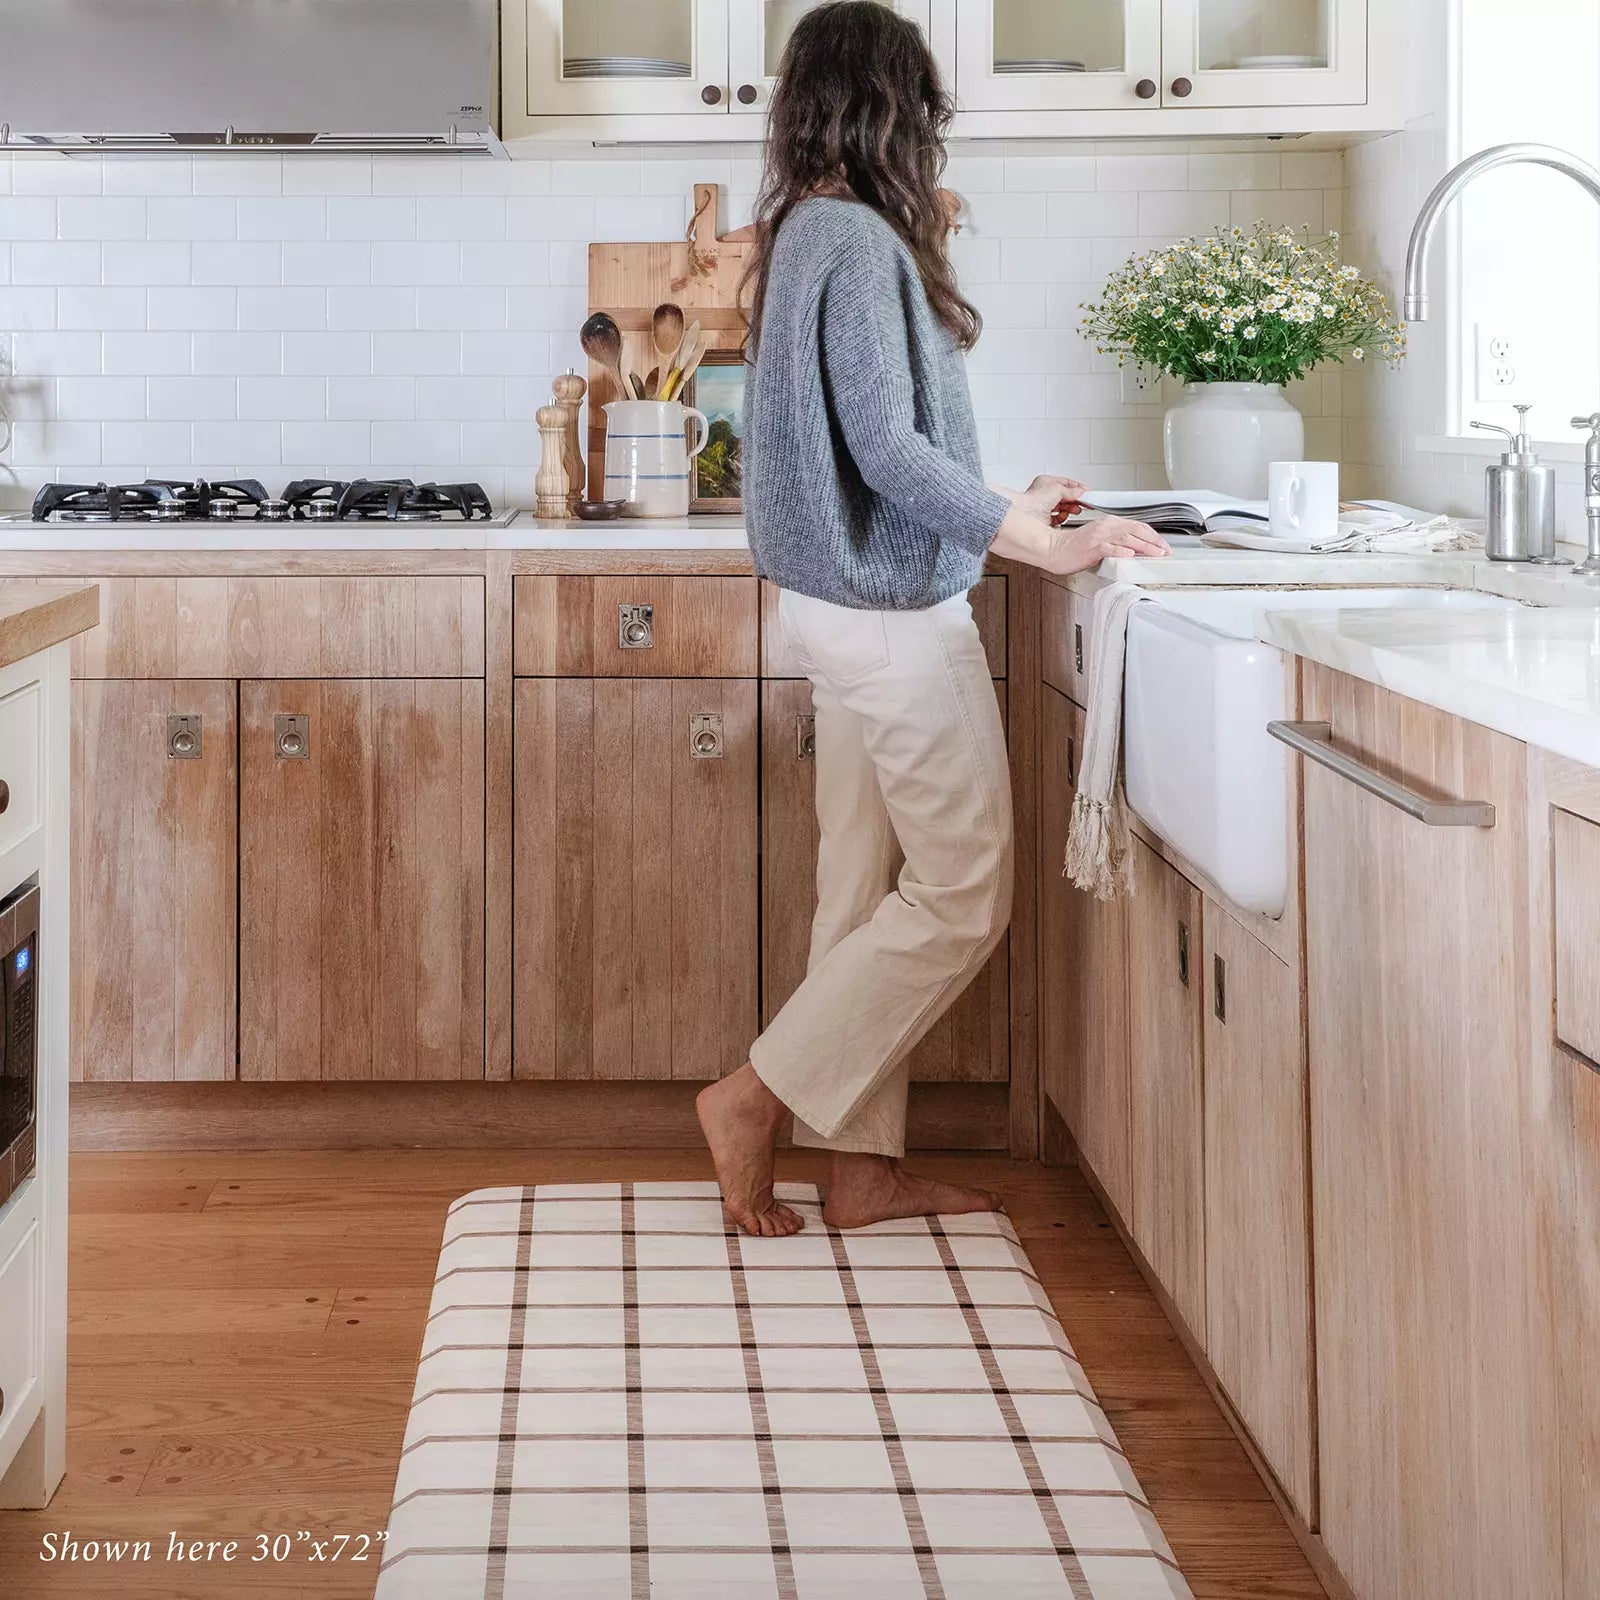 Windowpane Neutral Grid Pattern Standing Mat shown in kitchen with woman reading cookbook